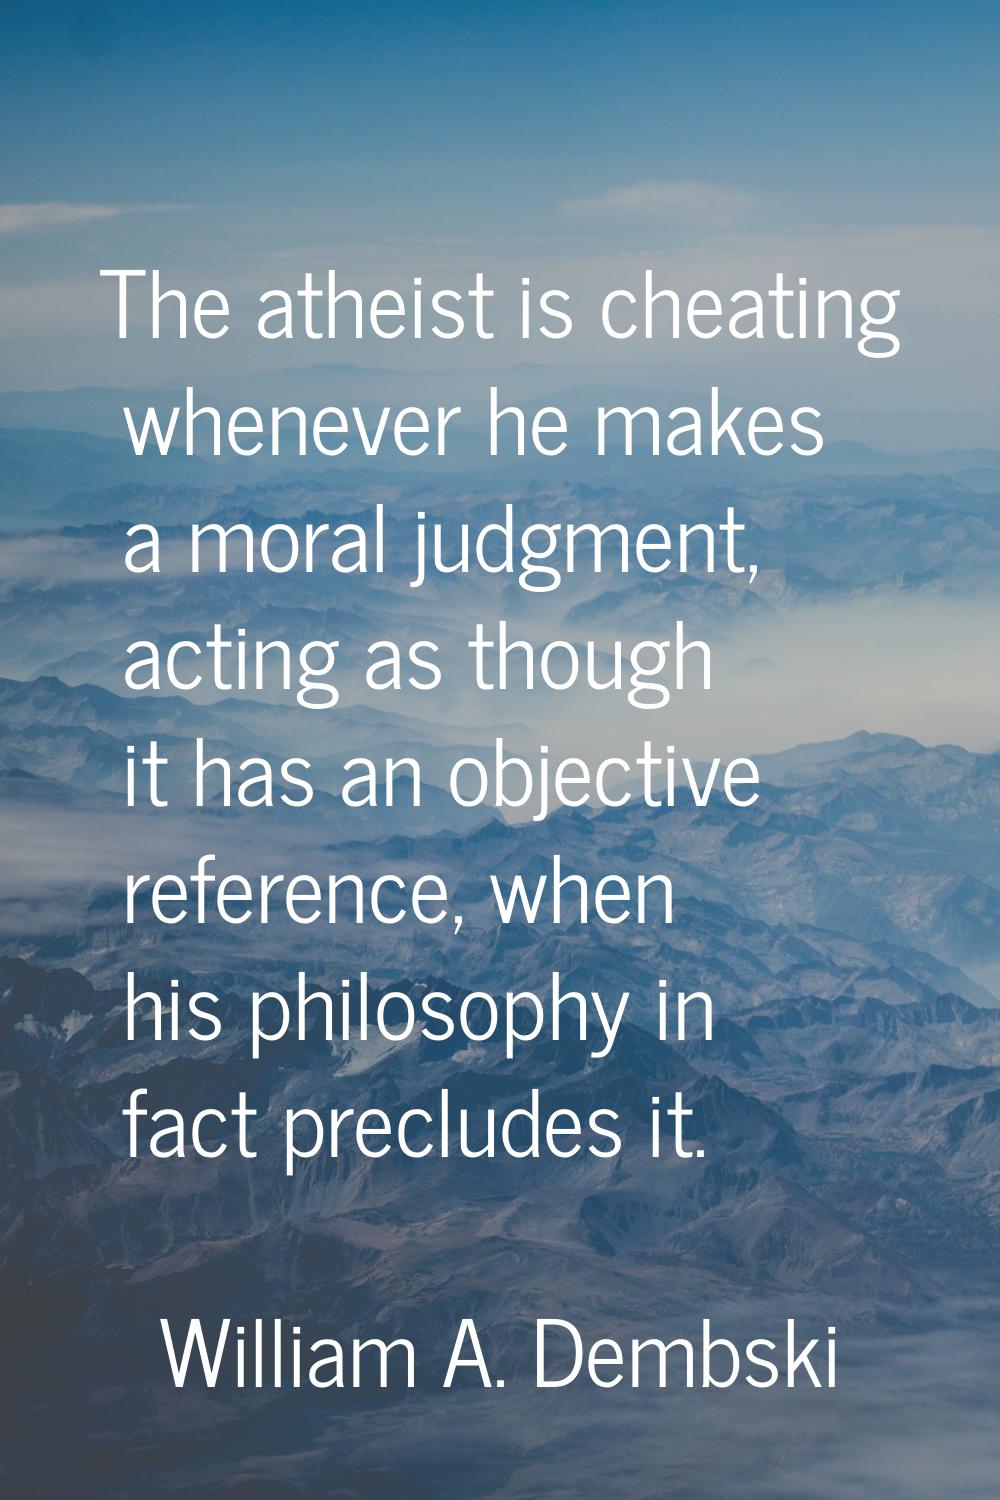 The atheist is cheating whenever he makes a moral judgment, acting as though it has an objective re